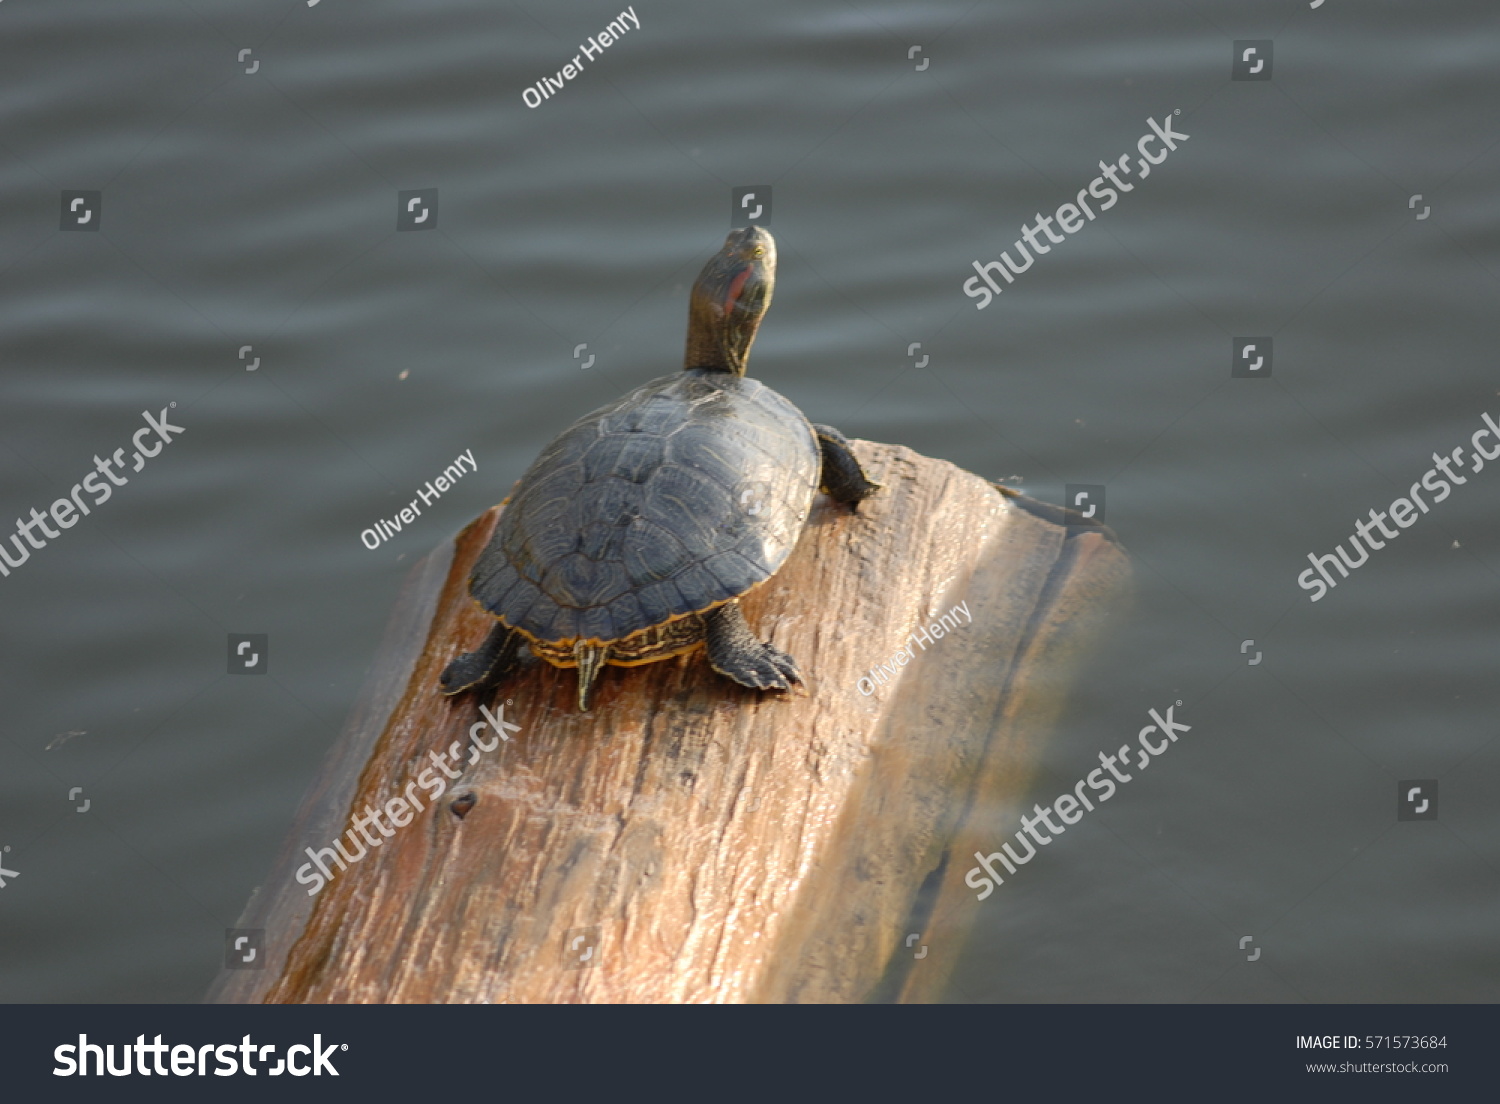 Turtle on a log in a pond #571573684